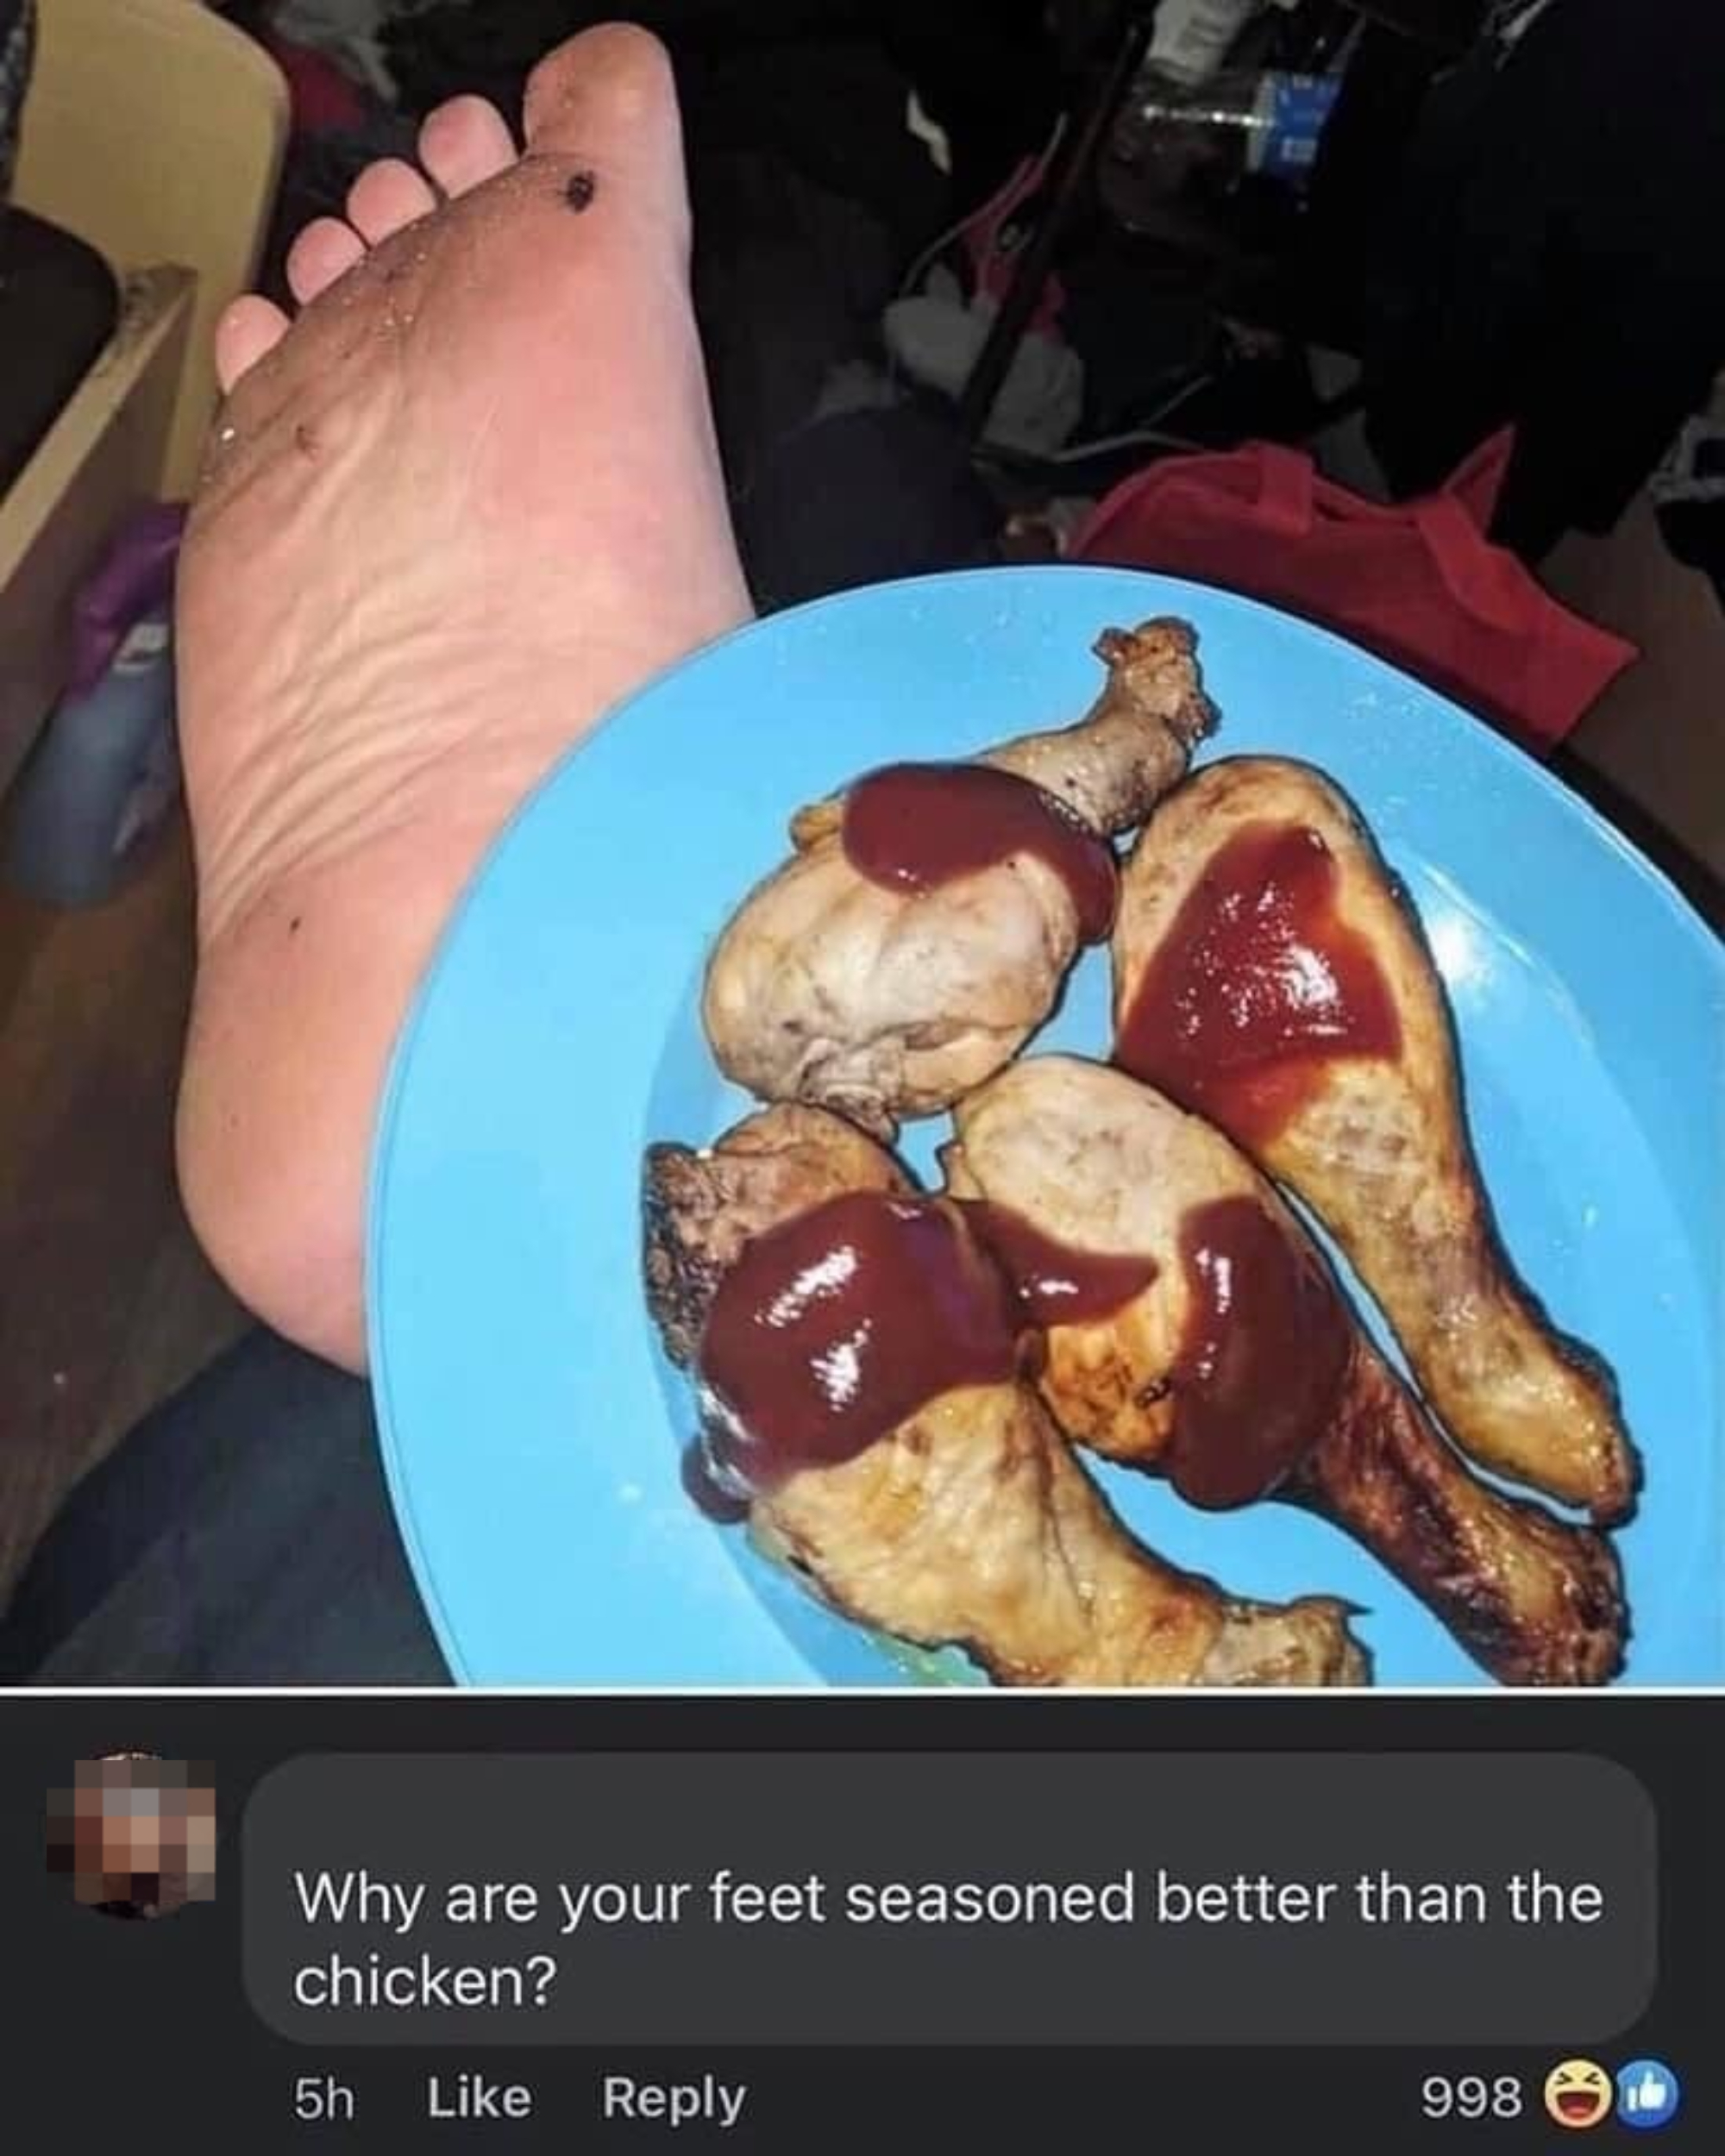 Someone posts a plate of chicken legs with some BBQ sauce resting on their leg, with their bare, dirty foot visible; response: &quot;Why are your feet seasoned better than the chicken?&quot;